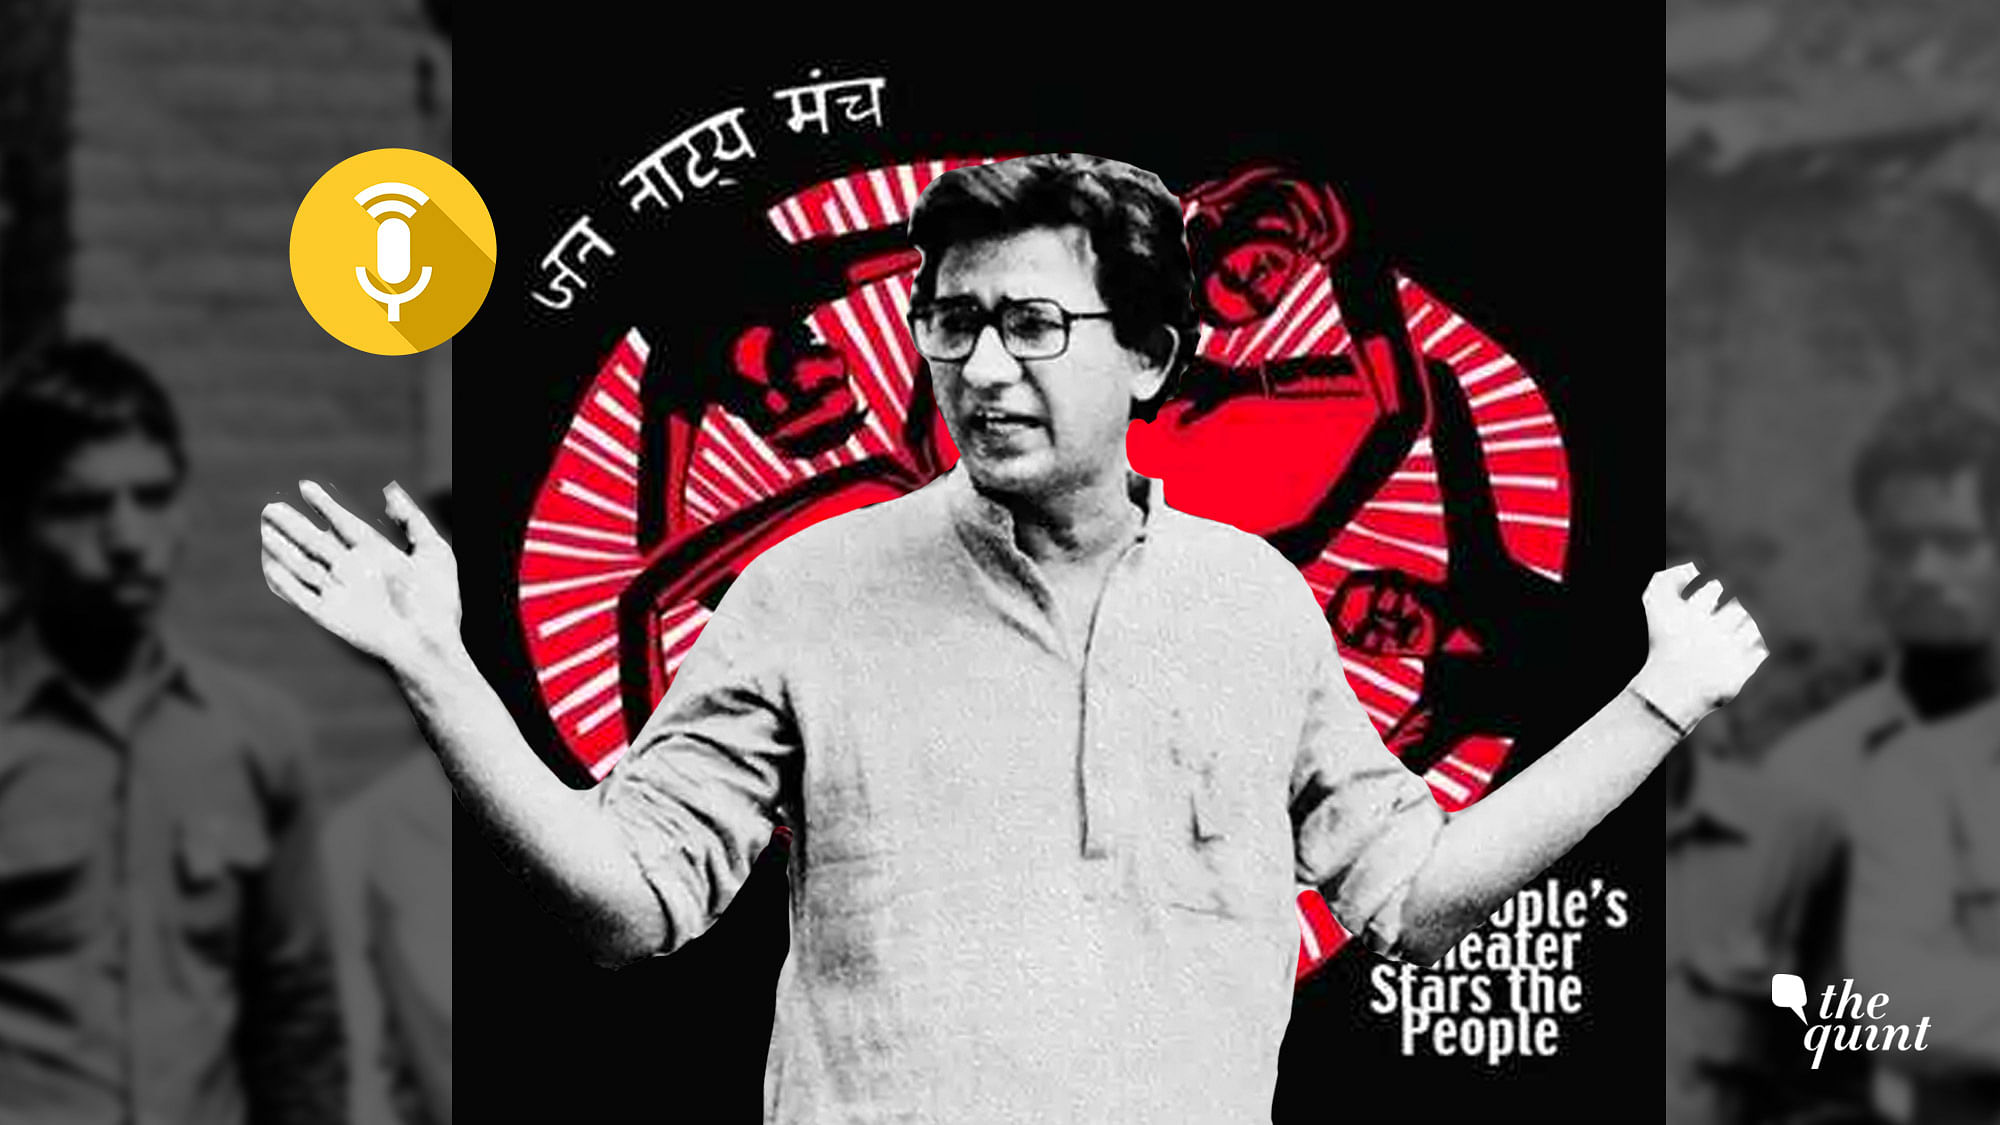 2 January, 2019 marks playwright and director Safdar Hashmi’s twentieth death anniversary. To mark this day, we spoke to his older brother Sohail Hashmi.